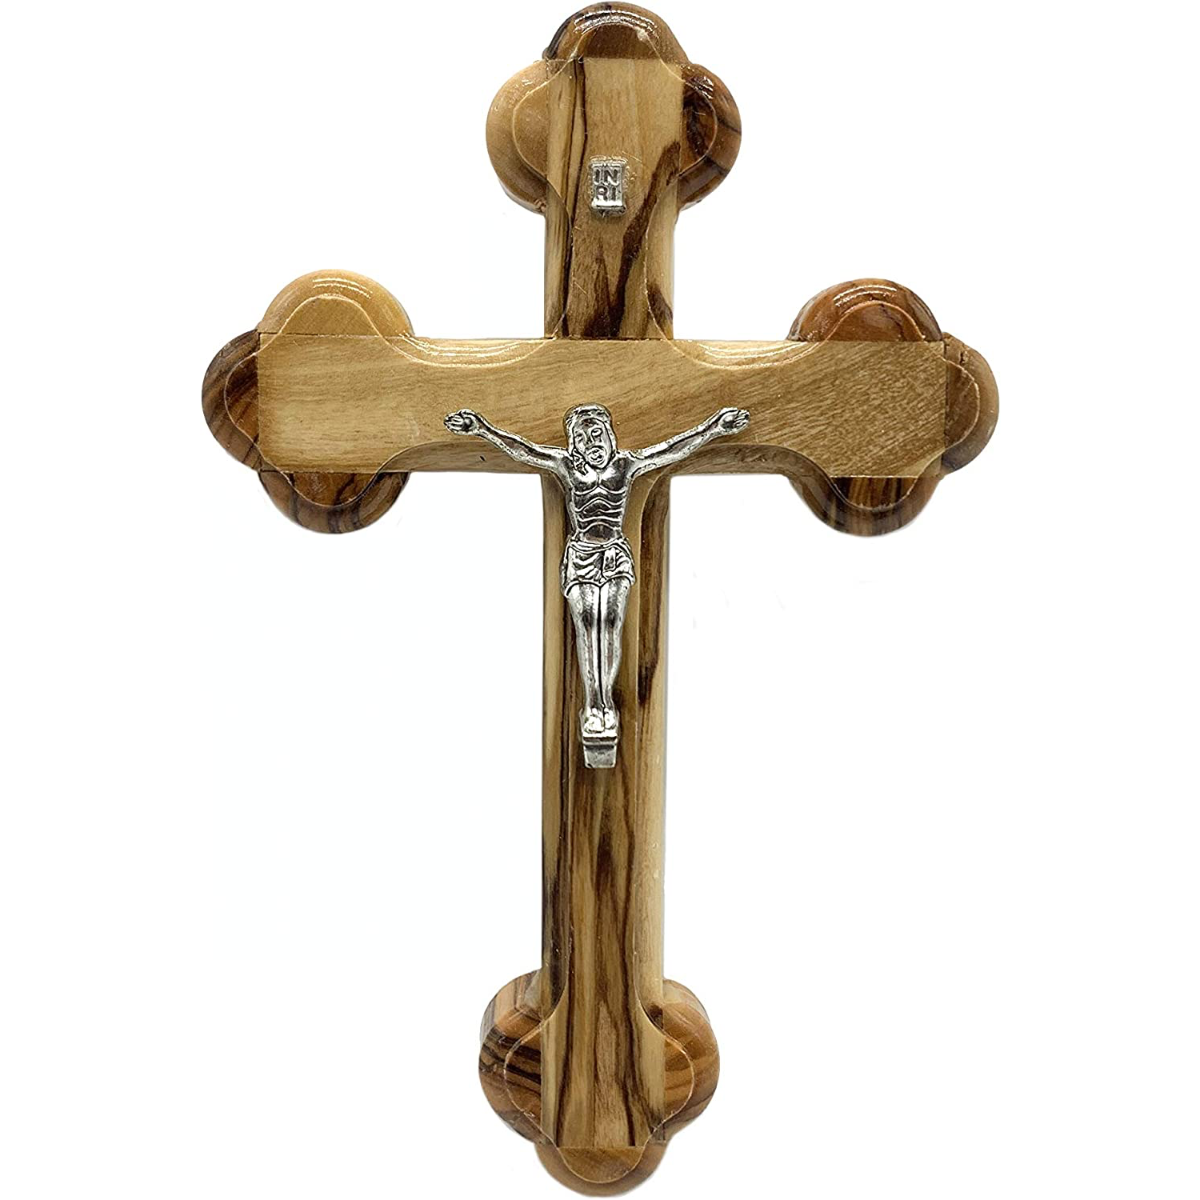 Handmade Nativity Scene Orthodox Olive Wood Crucifix 4 Lenses with a Certificate Made in the Holy Land (availably 4 Sizes)